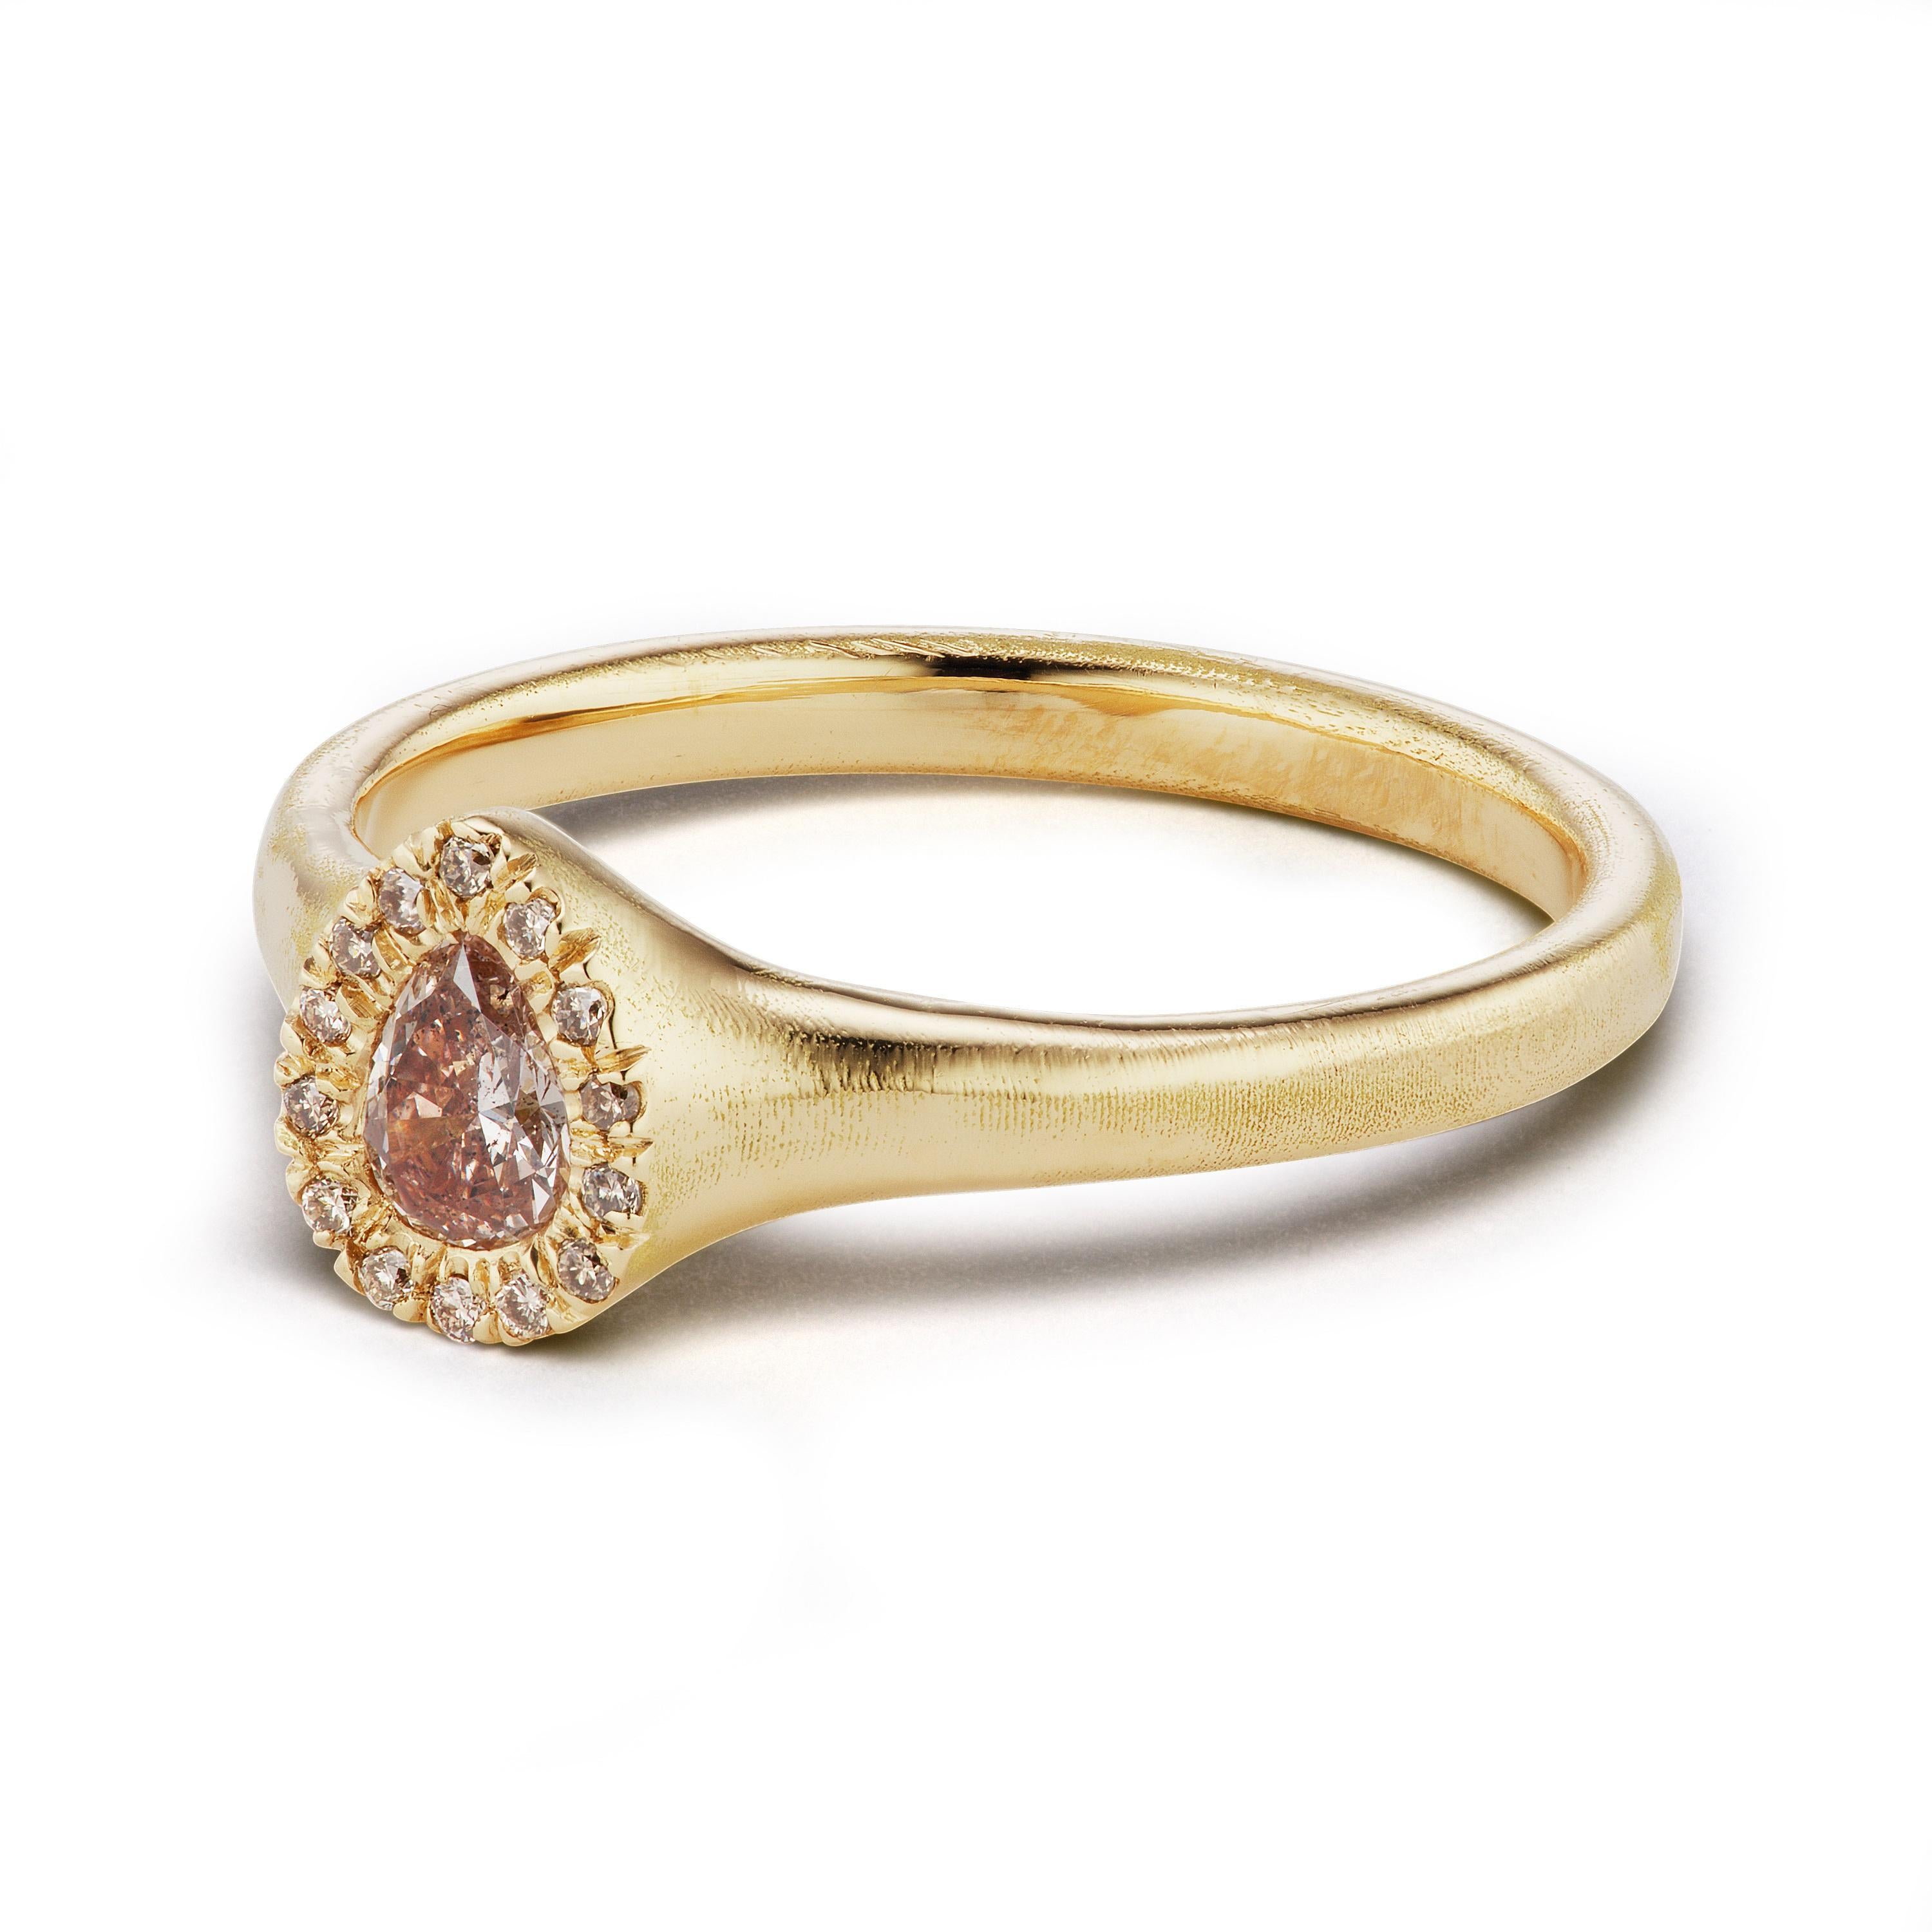 The Pebble Halo ring, from our Barefoot Collection, is hand-crafted with 18-karat recycled yellow gold, and features one pear shape, natural pink color diamond, and 14 champagne accent diamonds in the halo. The Pebble Halo ring would lend itself